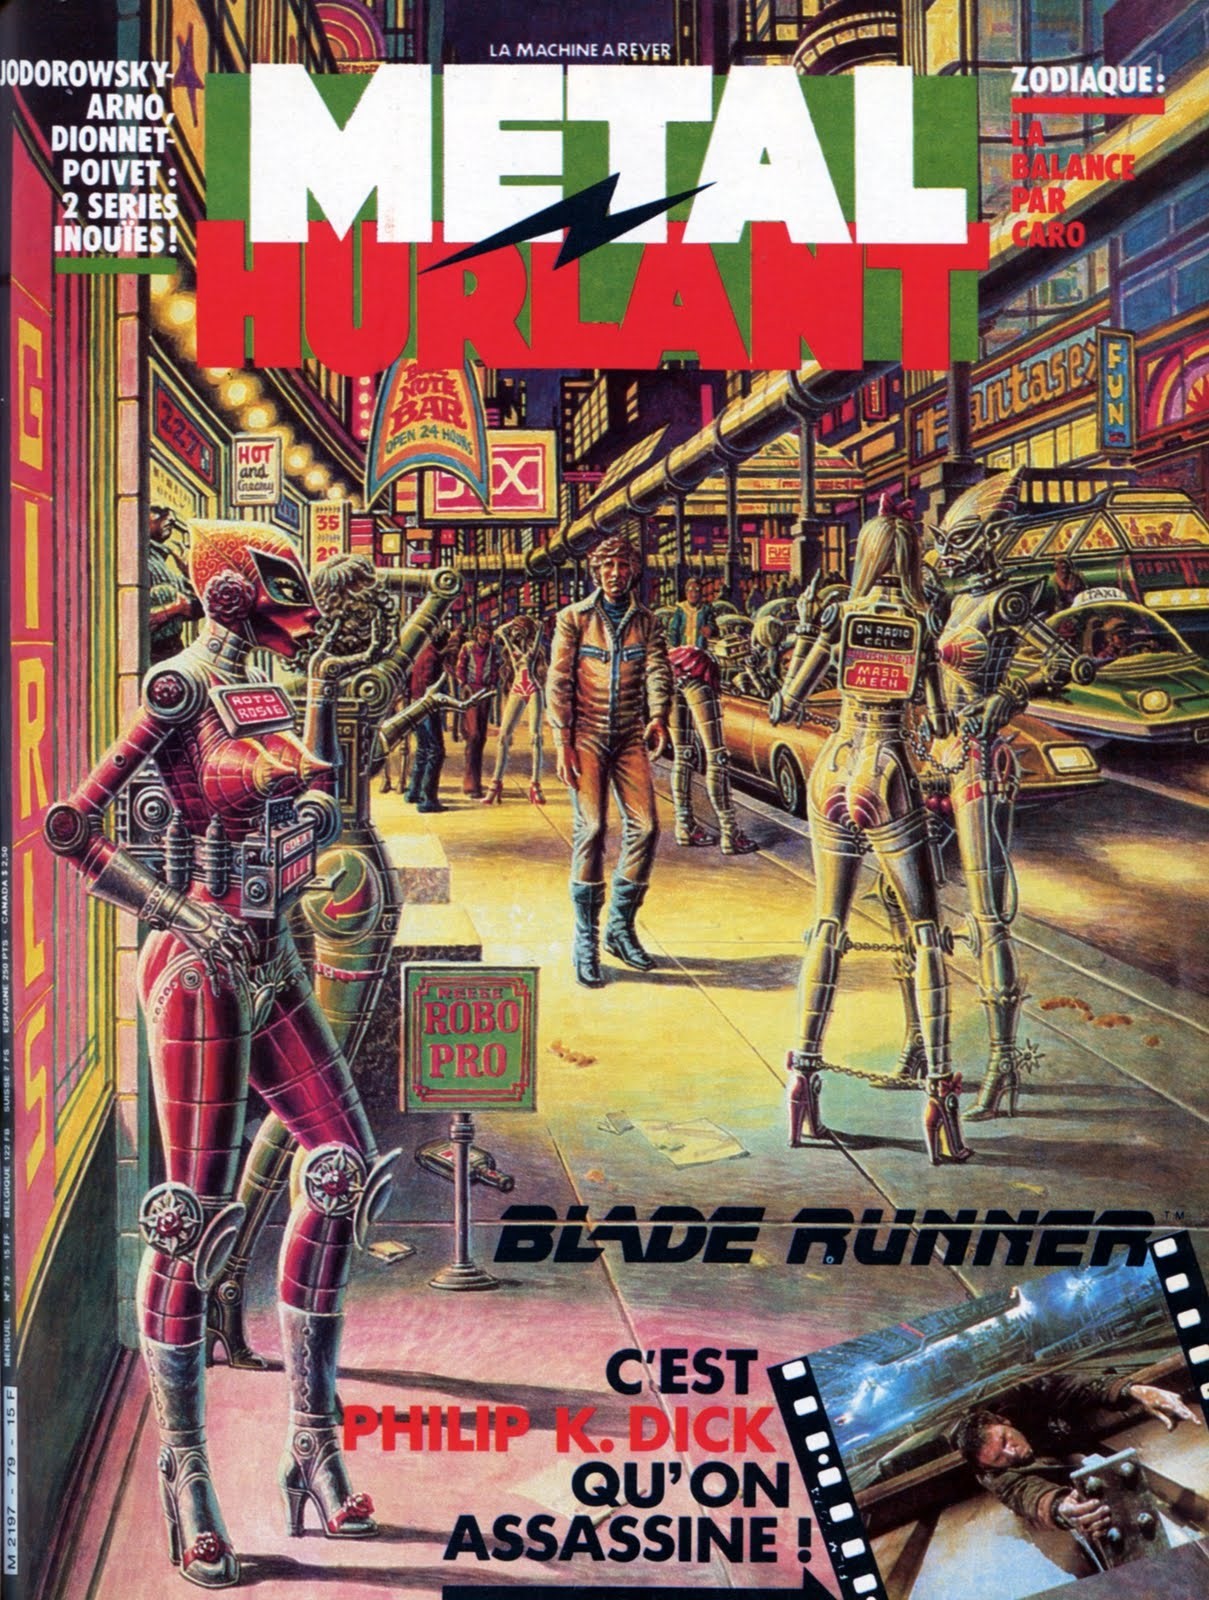 80s Comics - The French sci-fi comic that inspired Blade Runner and Akira | Dazed